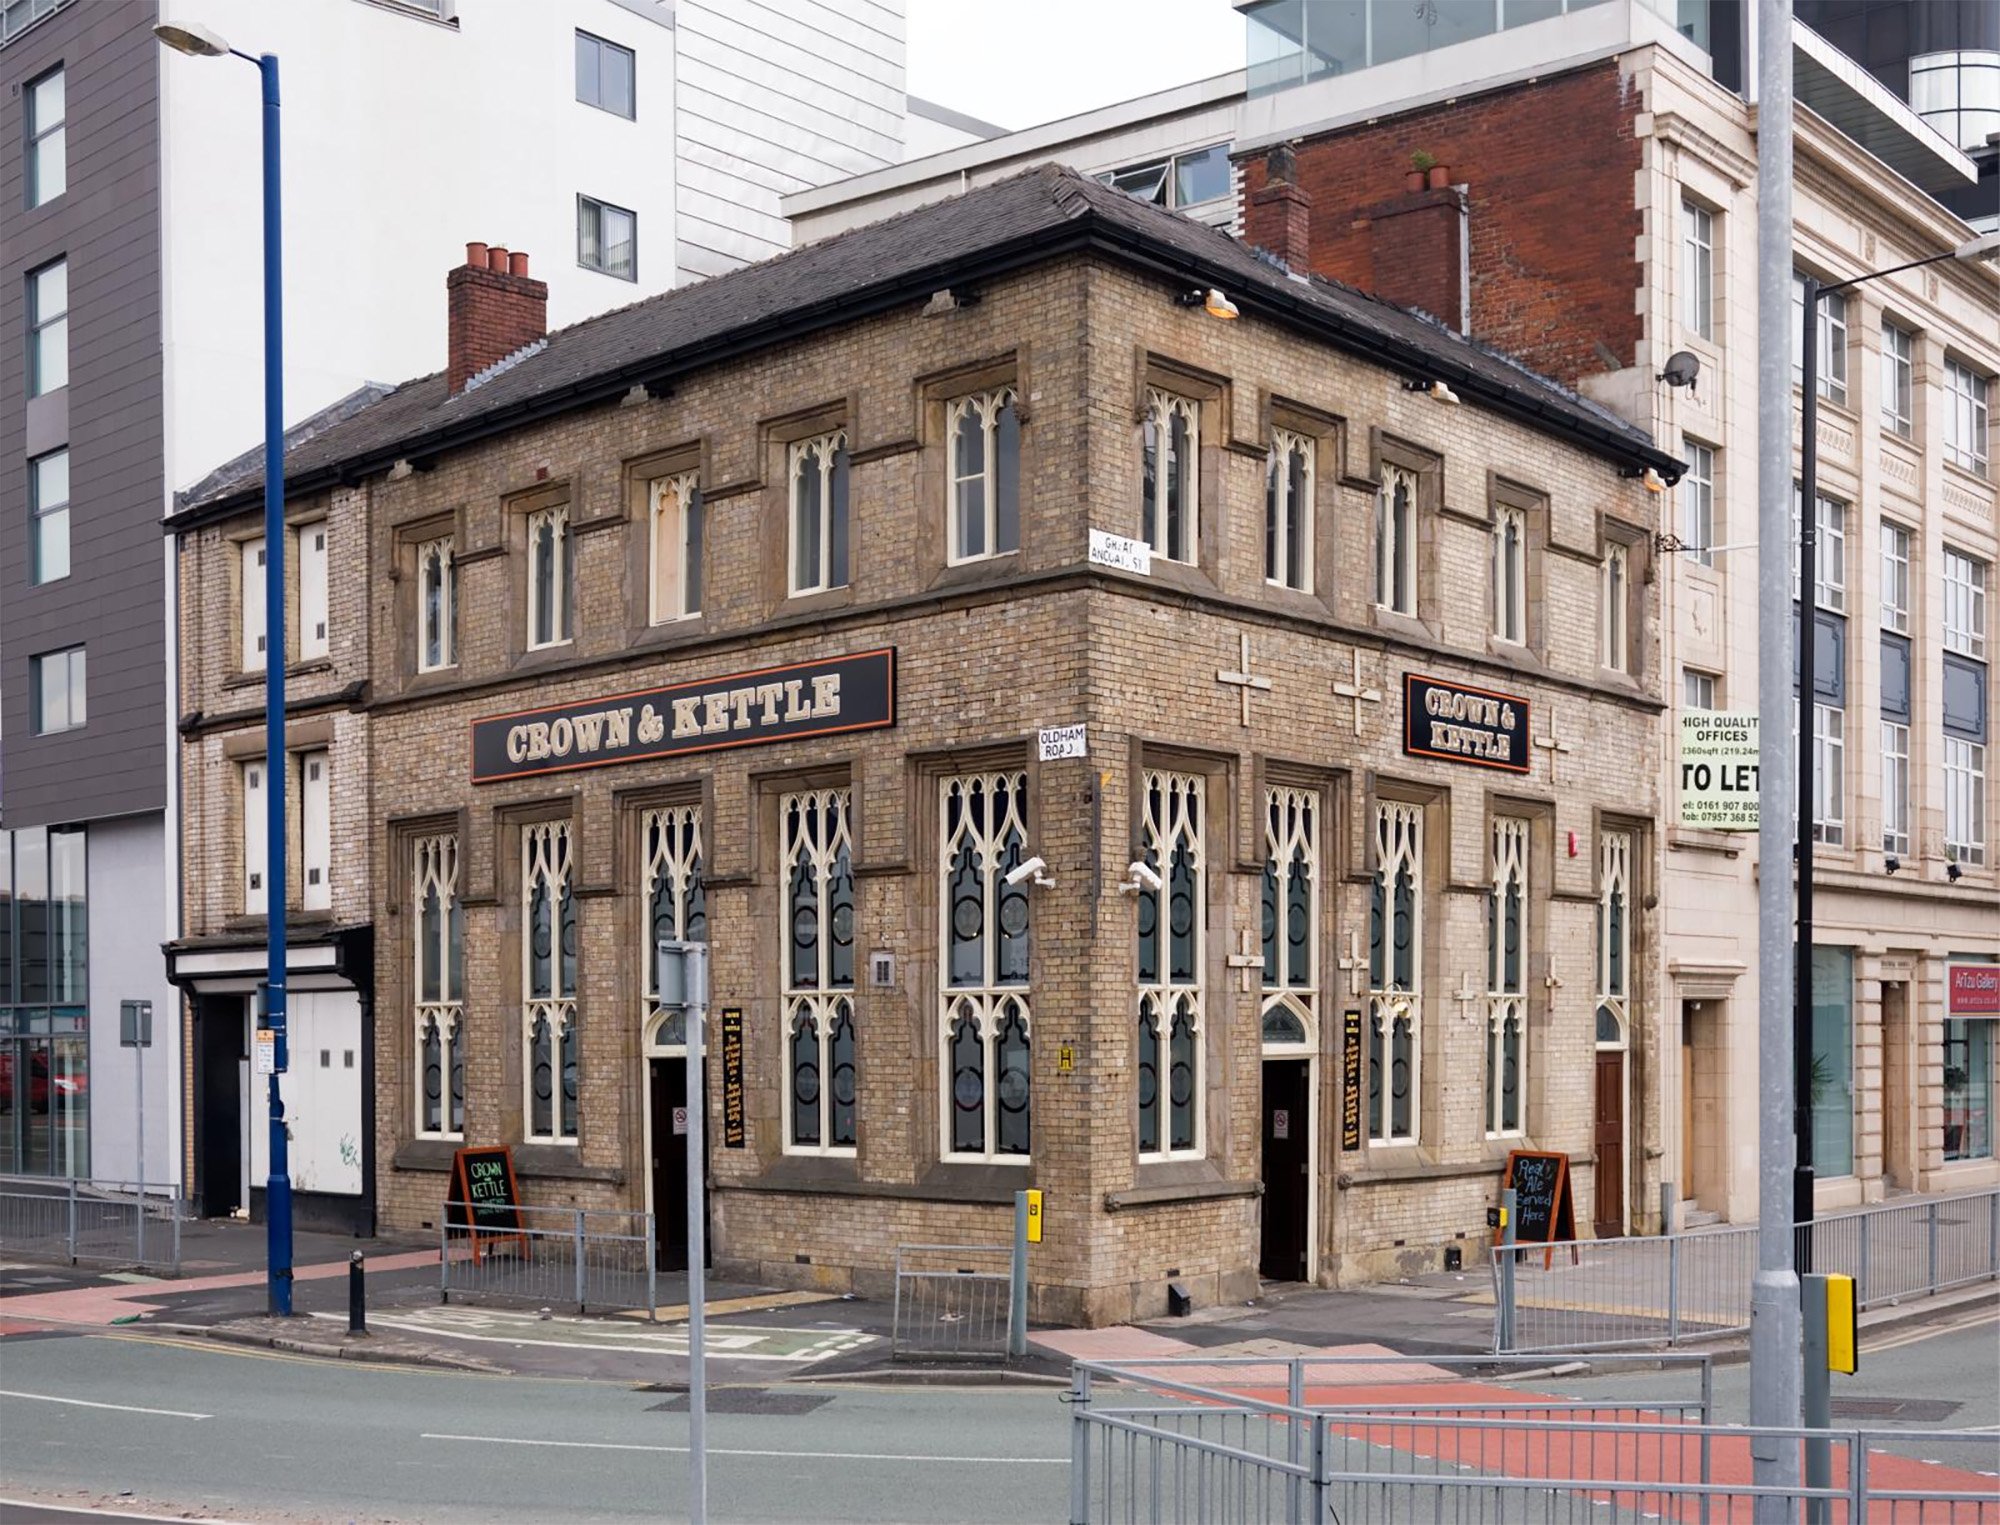 View of the Crown & Kettle pub in Manchester